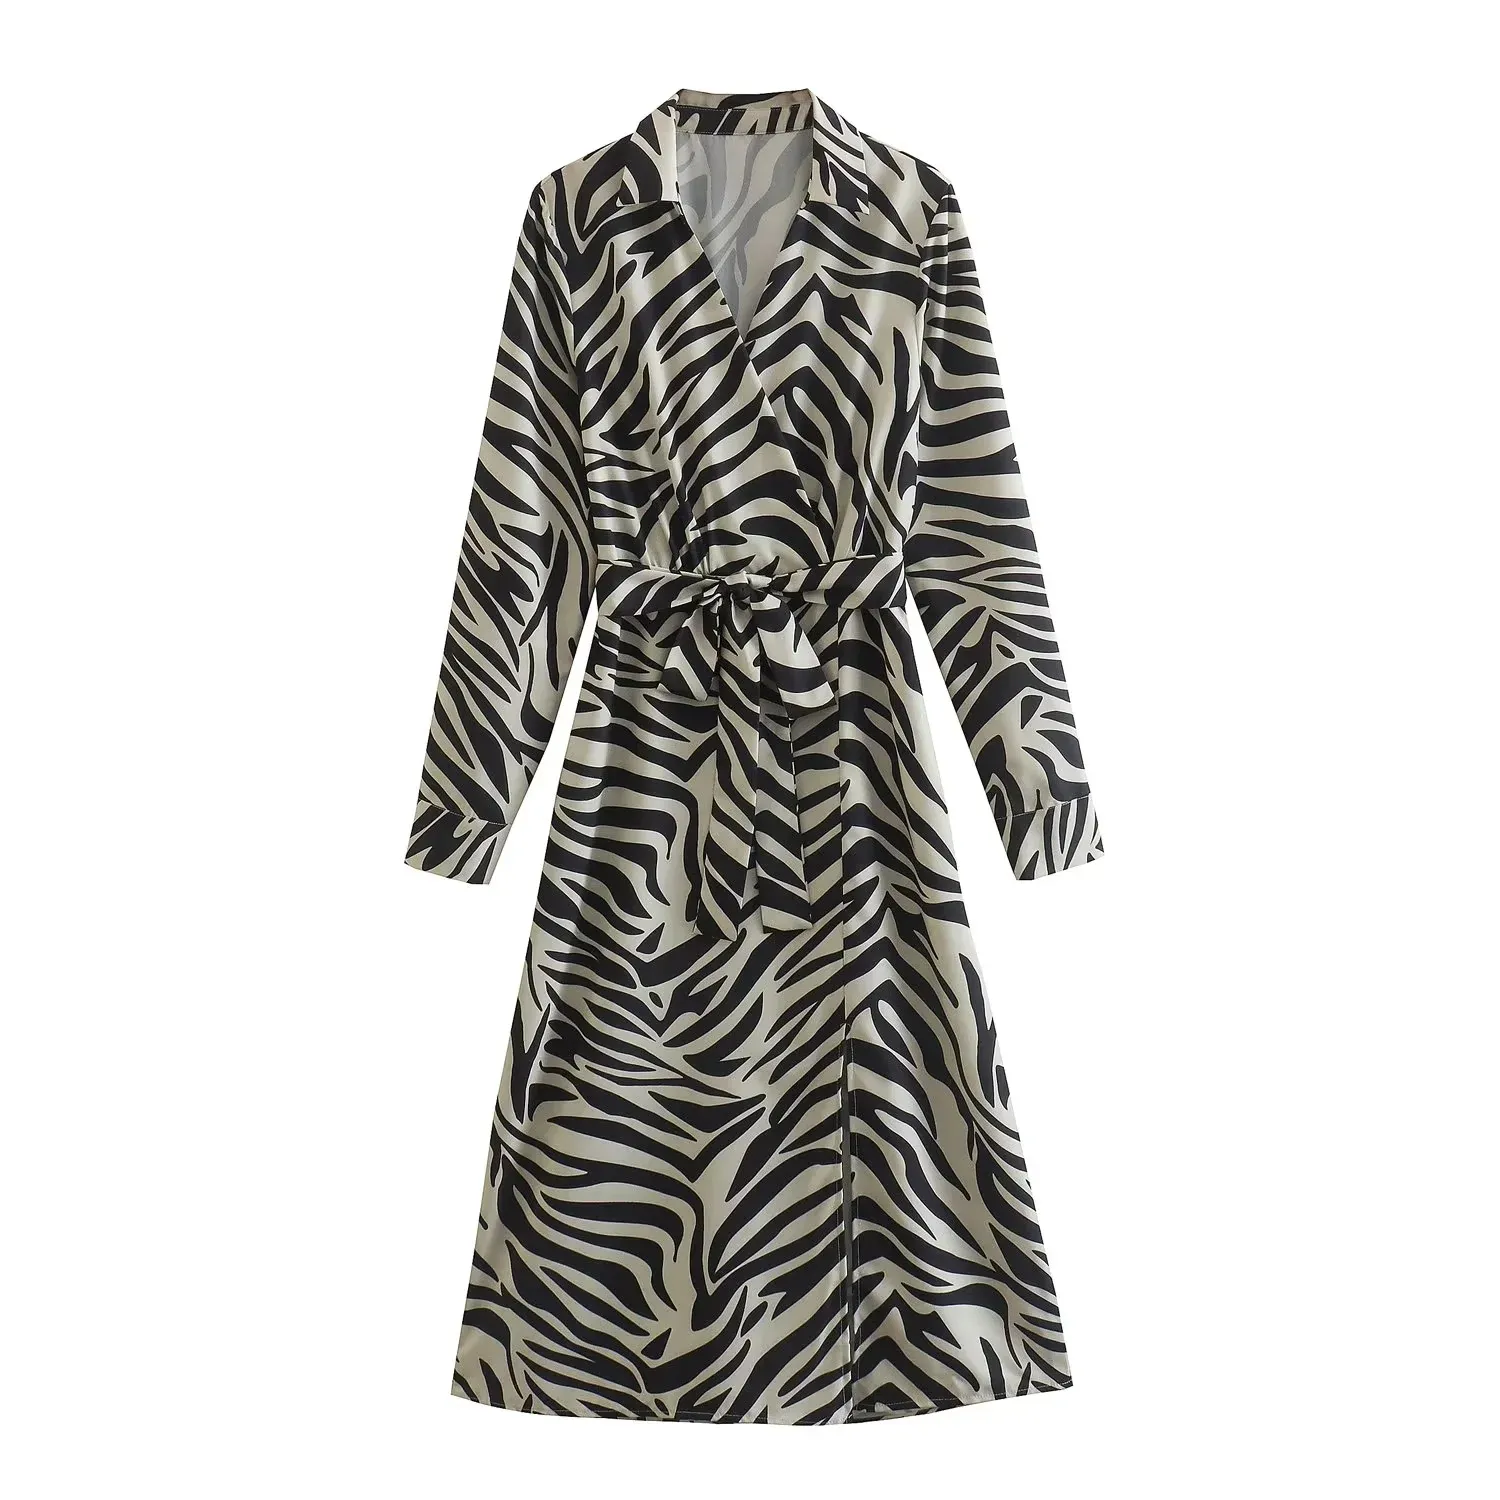 Black and white color long sleeve sashes turn down collar animal print women casual shirt dress